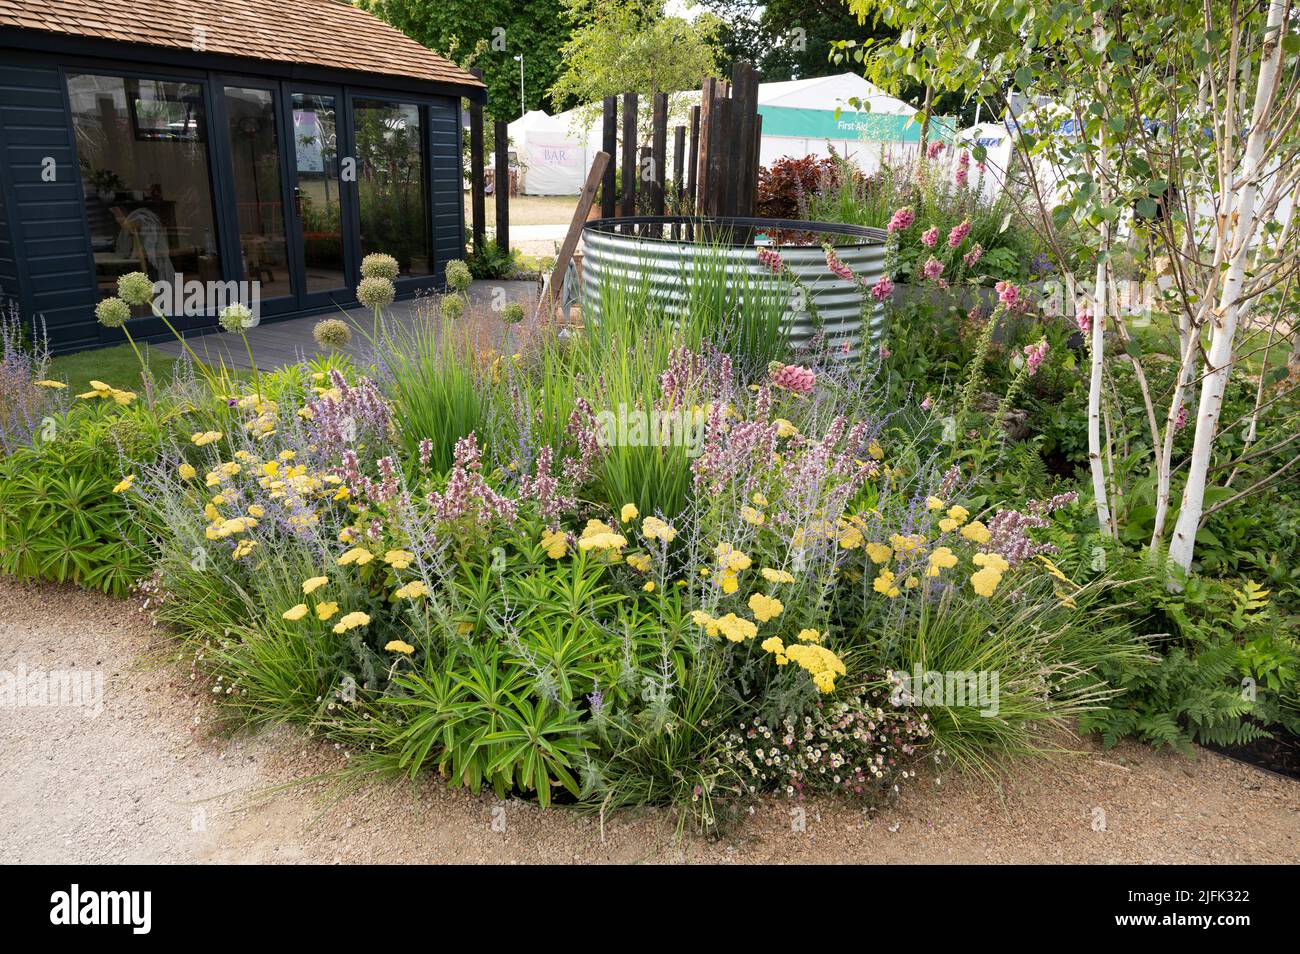 Hampton Court Palace, Surrey, UK. 4 July 2022. RHS Hampton Court Palace Garden Festival press day for the worlds largest flower show, running till 9 July 2022. Image: Feature garden: The Vitamin G Garden designed by Alan Williams with Jo Whiley is inspired by the evidence-based research that was published in April 2021 by RHS  scientists Professor Alistair Griffiths and Dr Lauriane Chalmin-Pui that proves how gardening benefits our mental, physical and social wellbeing. Credit: Malcolm Park/Alamy Live News Stock Photo